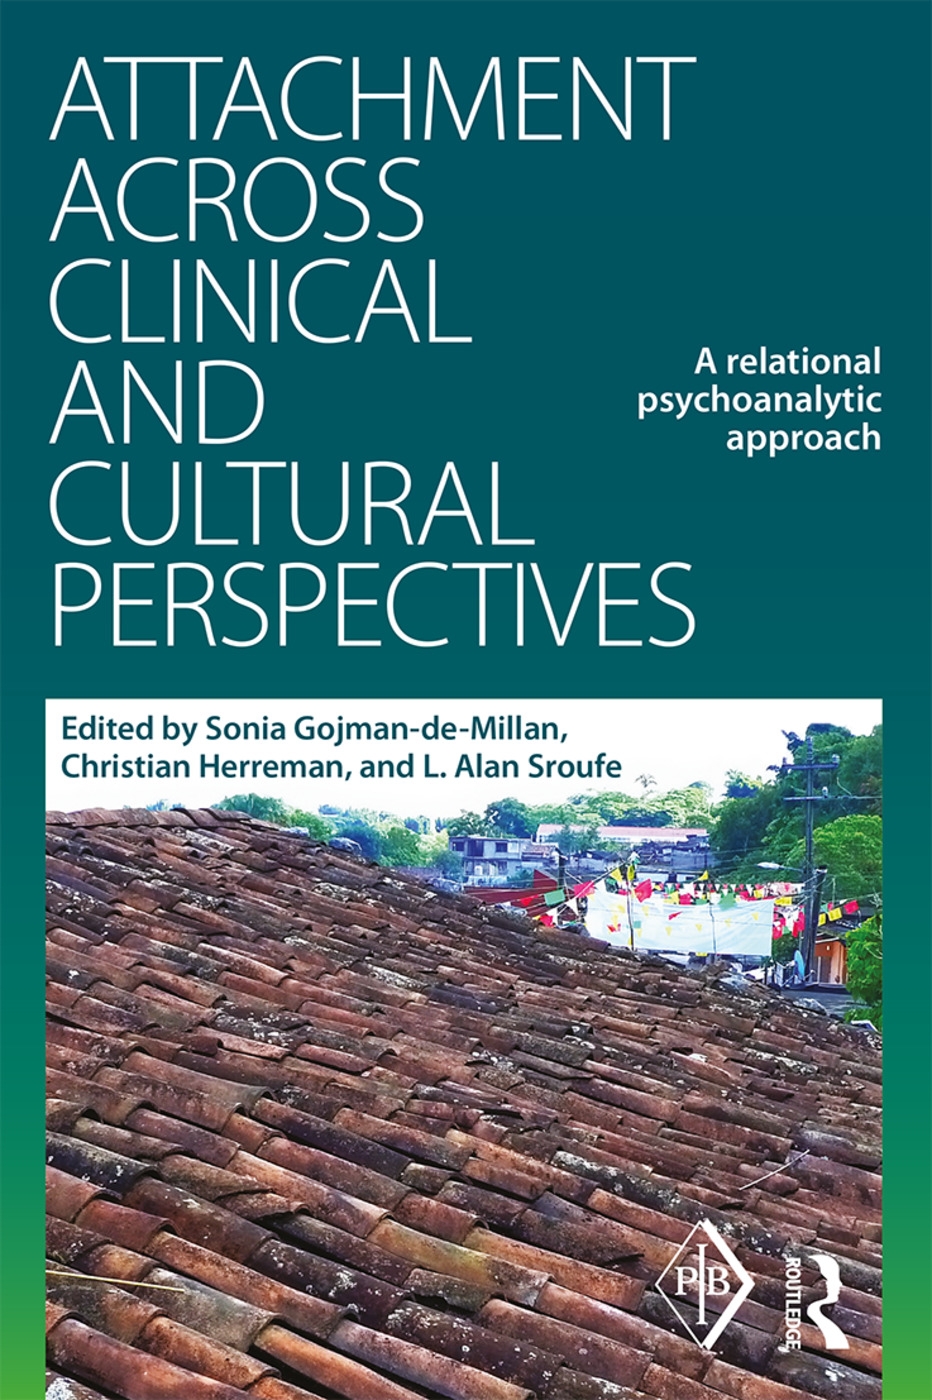 Attachment Across Clinical and Cultural Perspectives: A Relational Psychoanalytic Approach